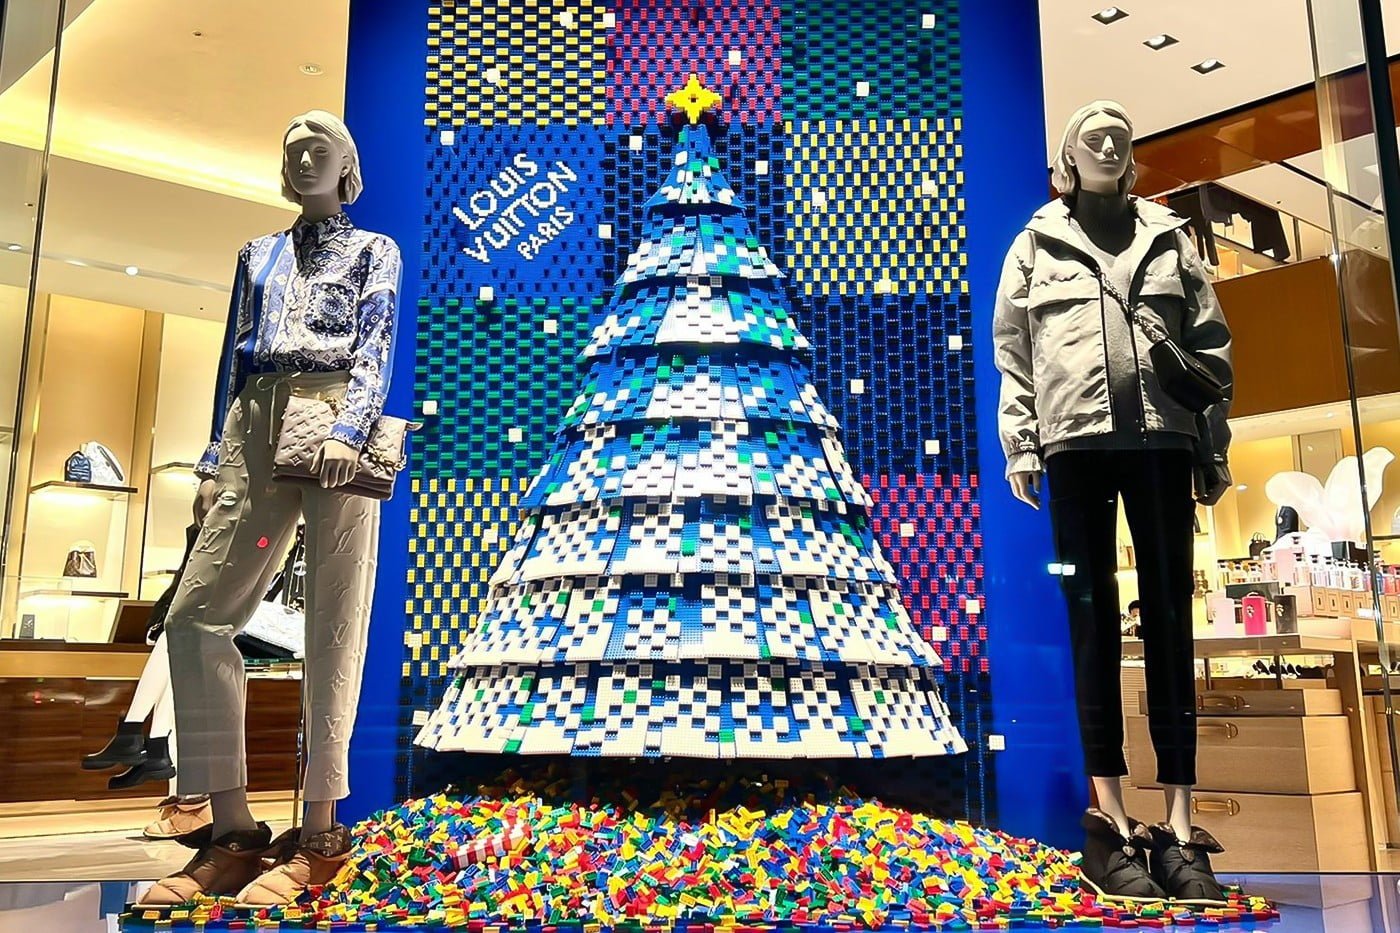 Lego Holiday window at LV 57th street. I wish they would do a